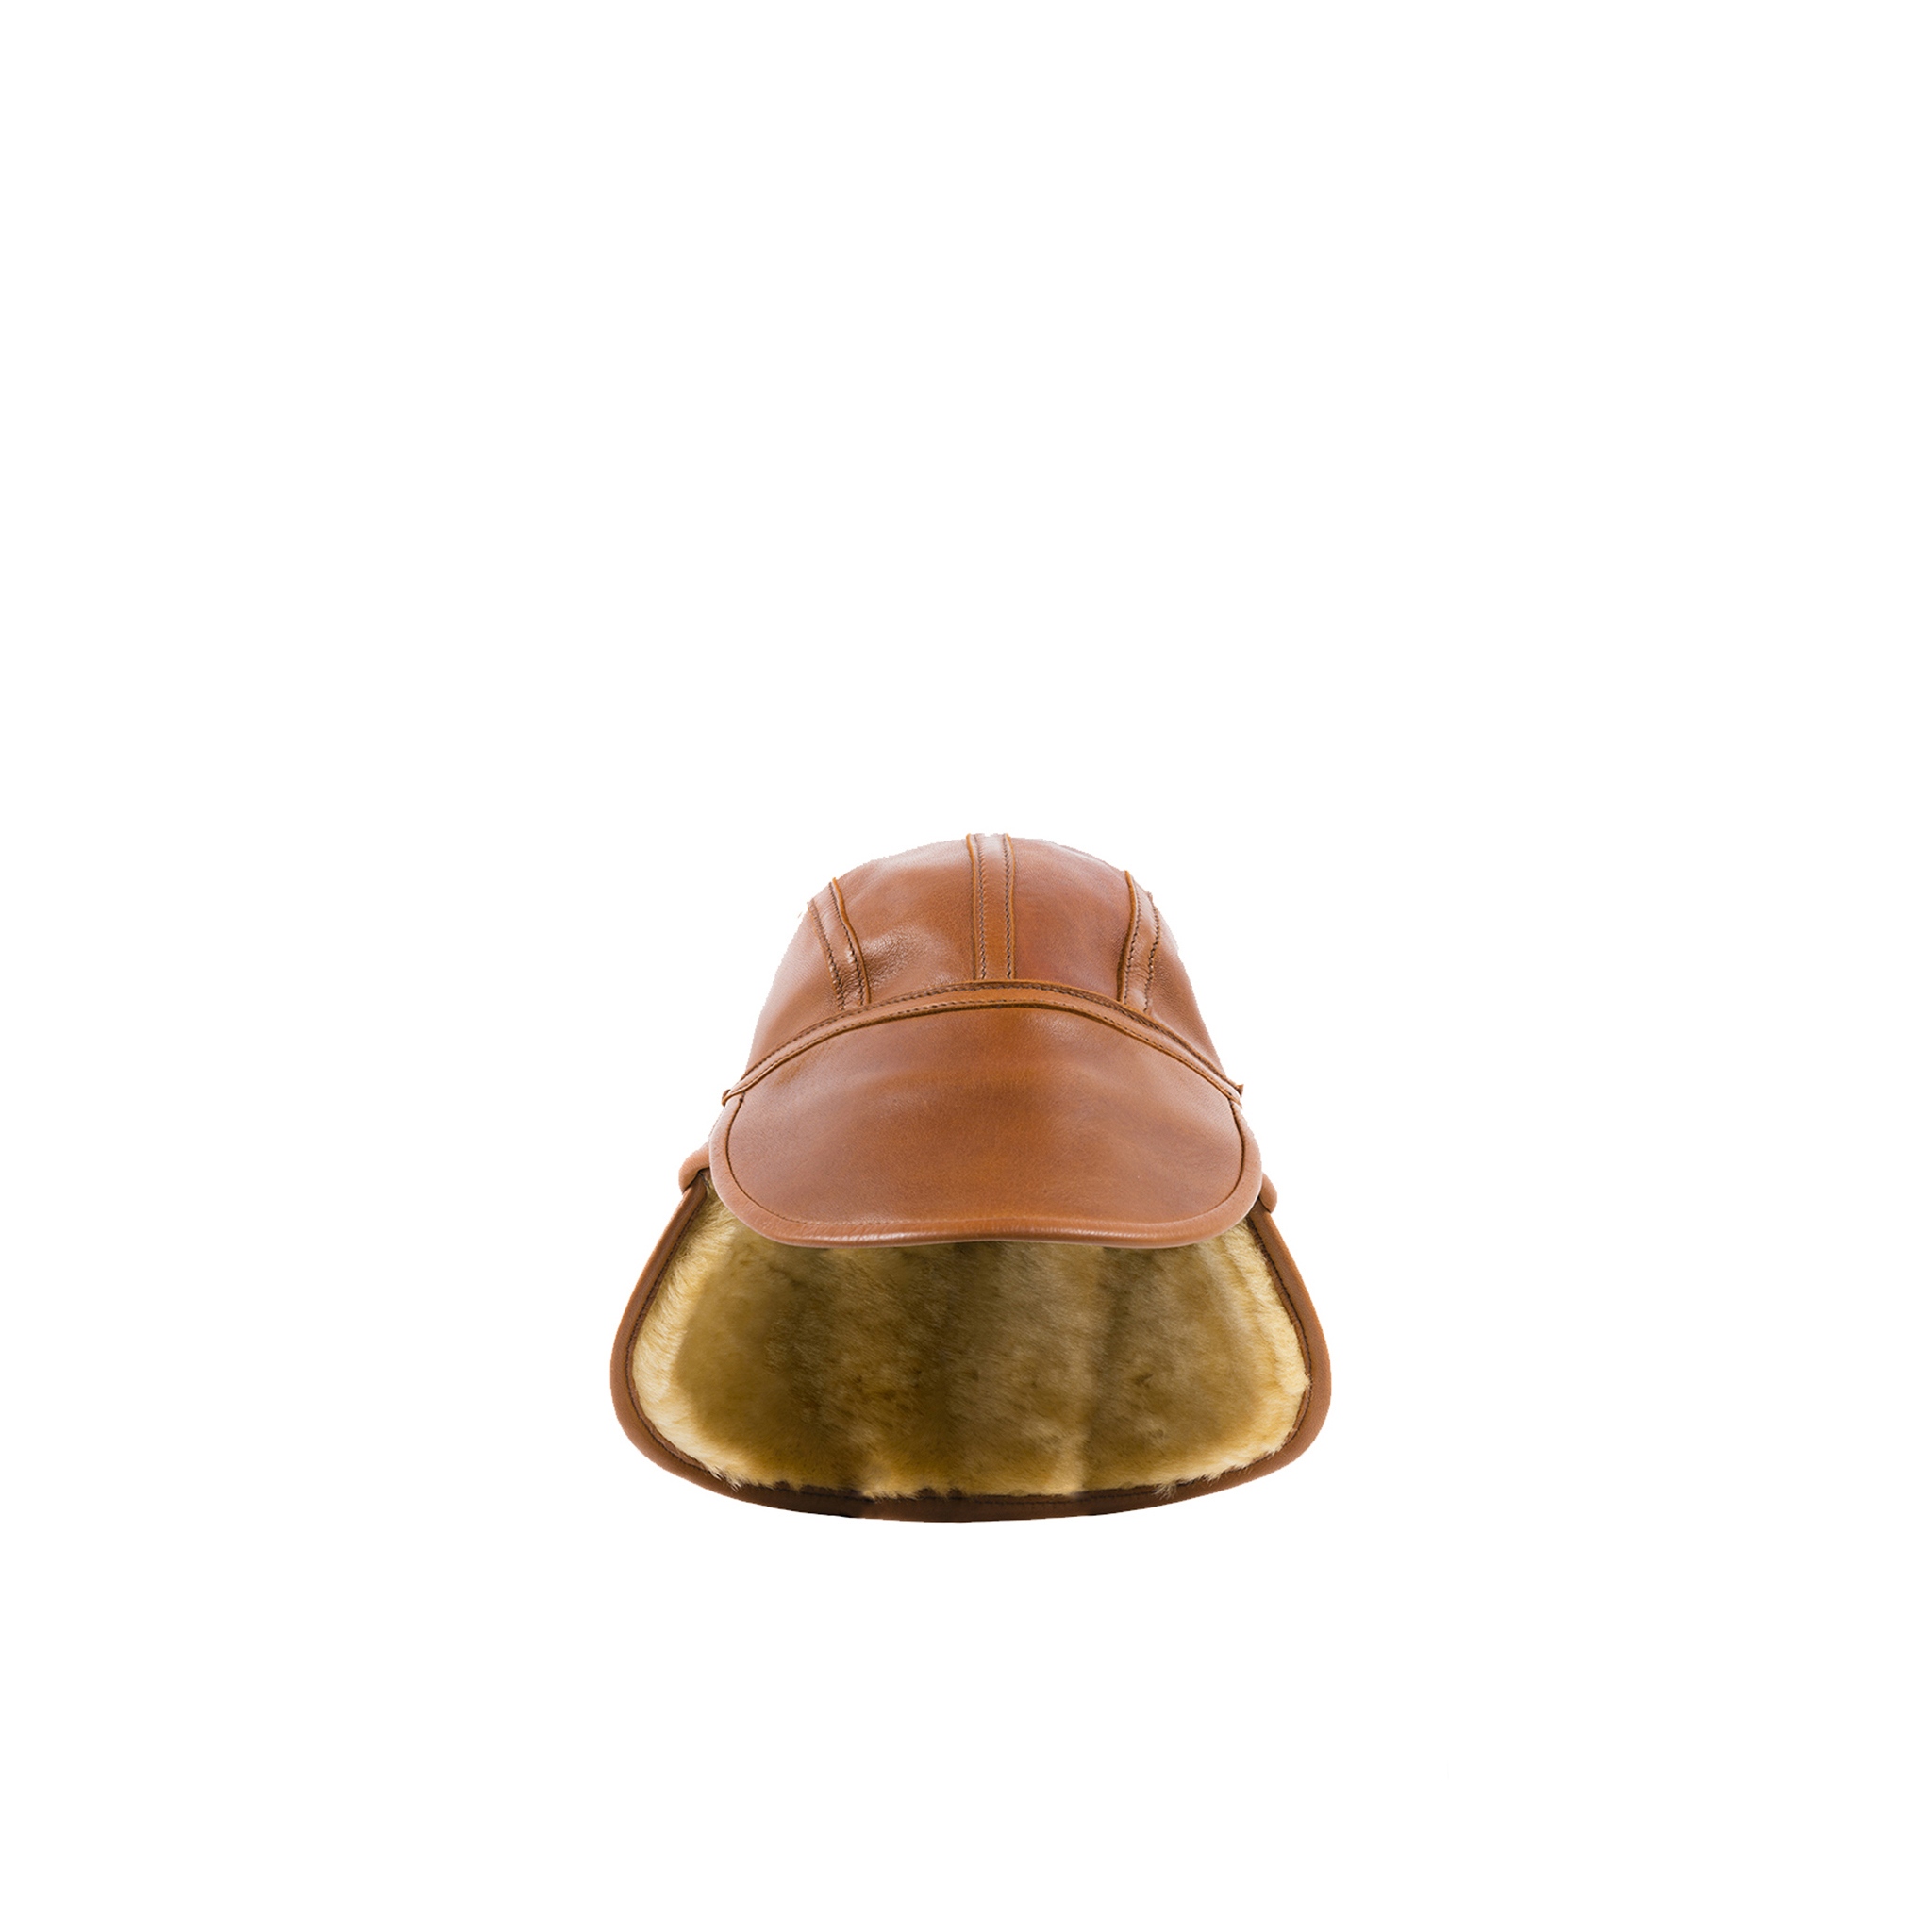 US Cap Type B2 Winter - Glossy leather - Brown color